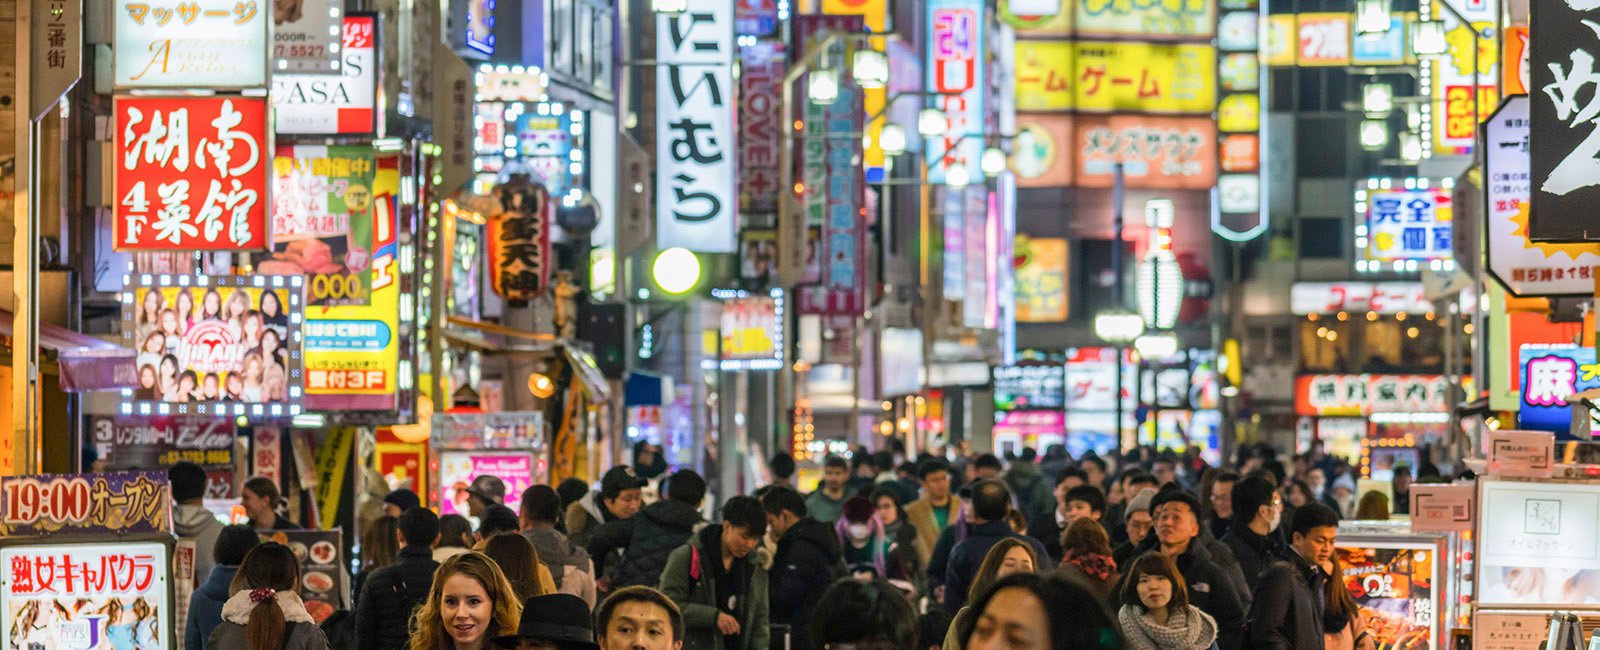 Japan gives its citizens until the age of 22 to decide their country of loyalty